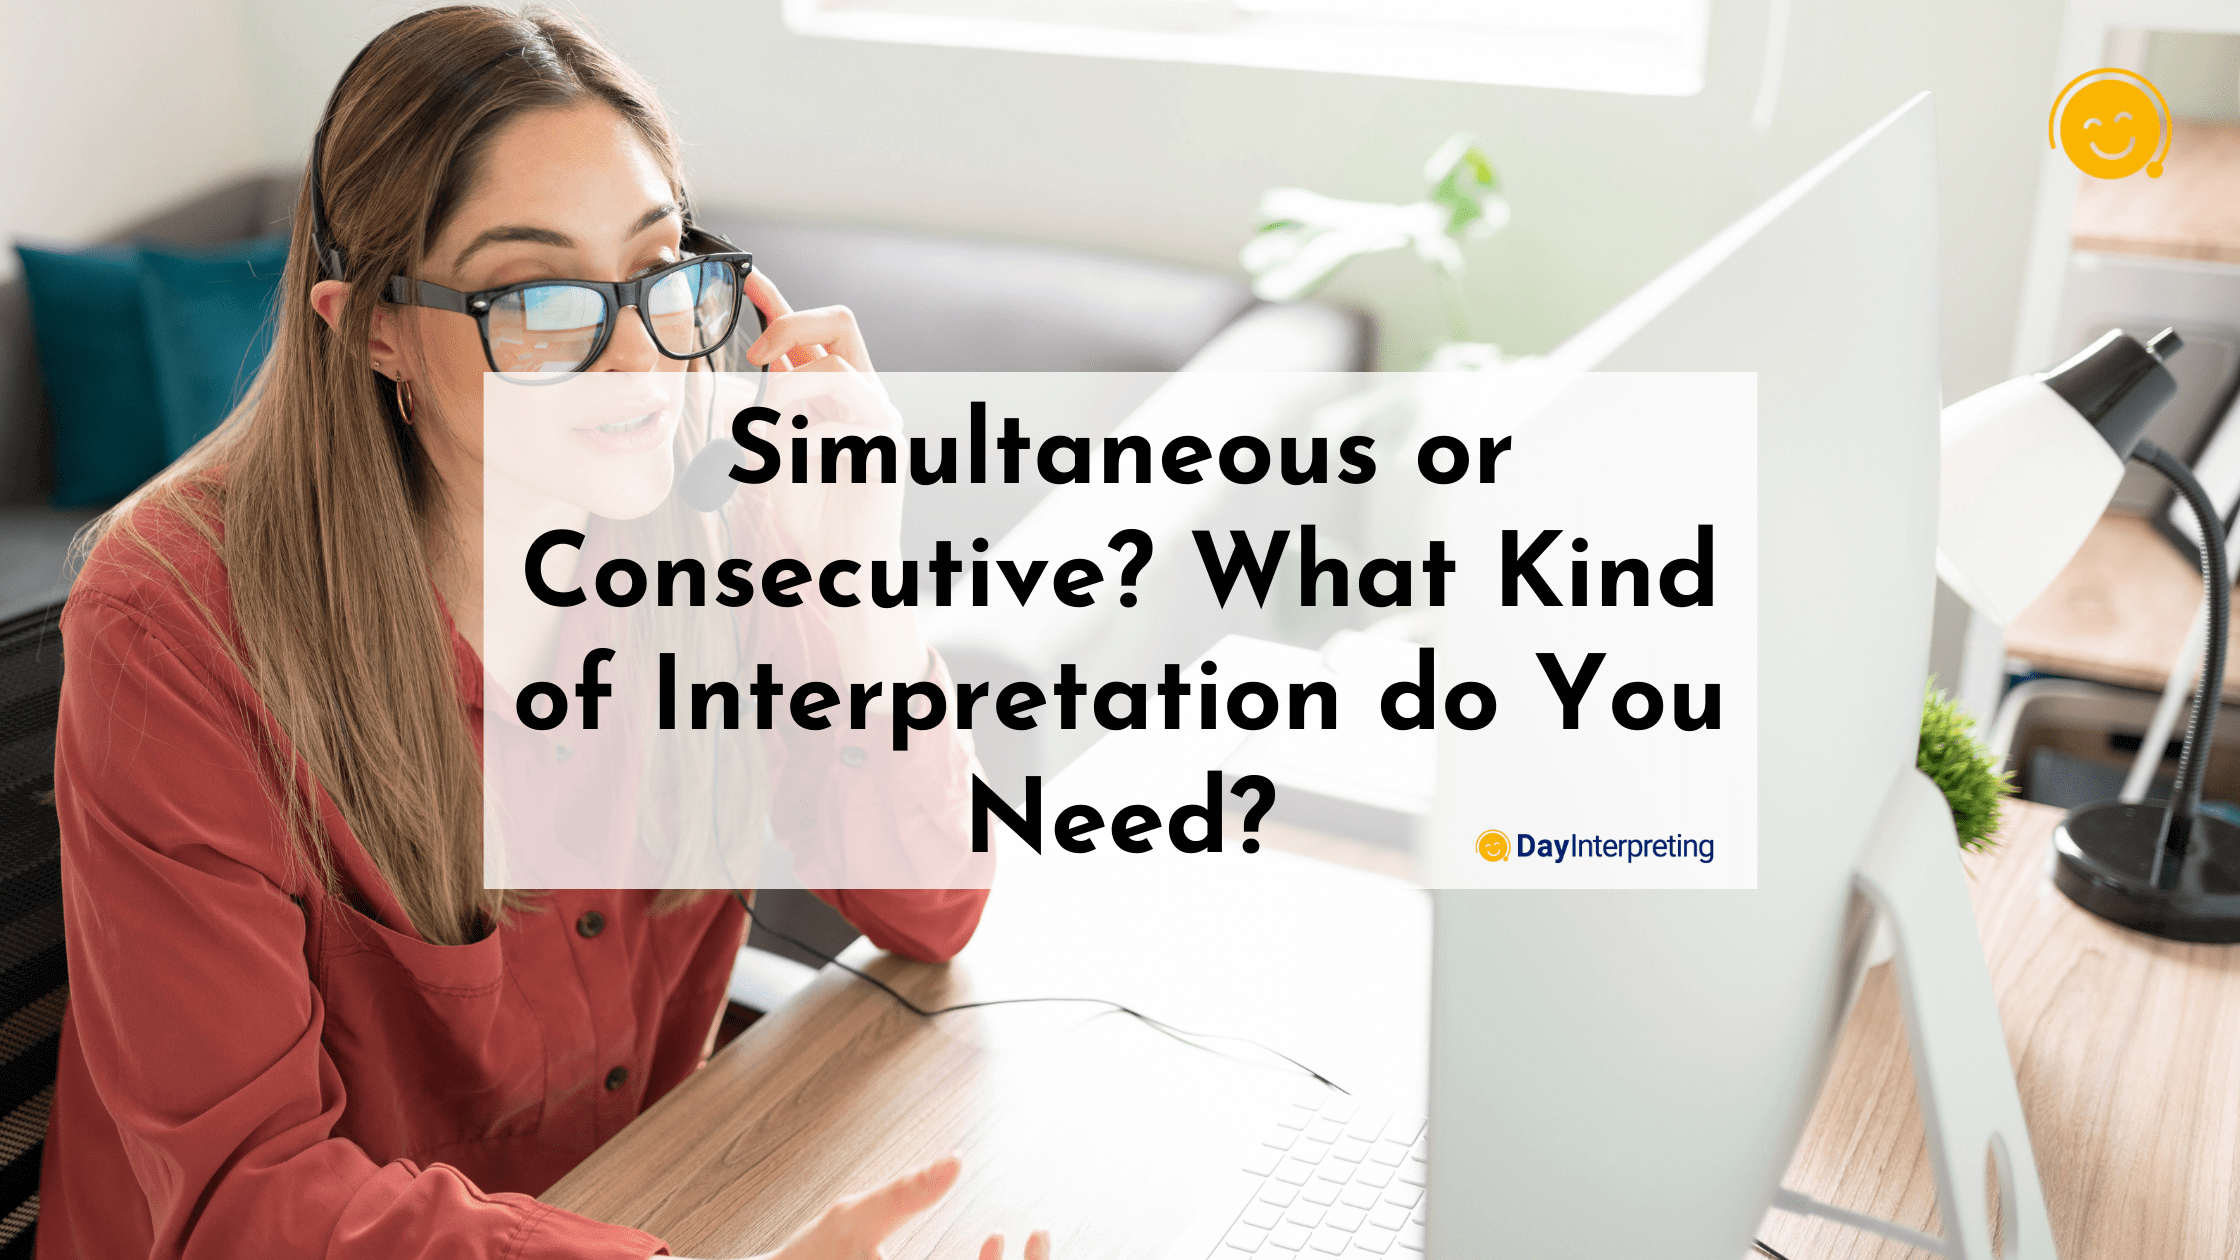 Simultaneous or Consecutive? What Kind of Interpretation do You Need?